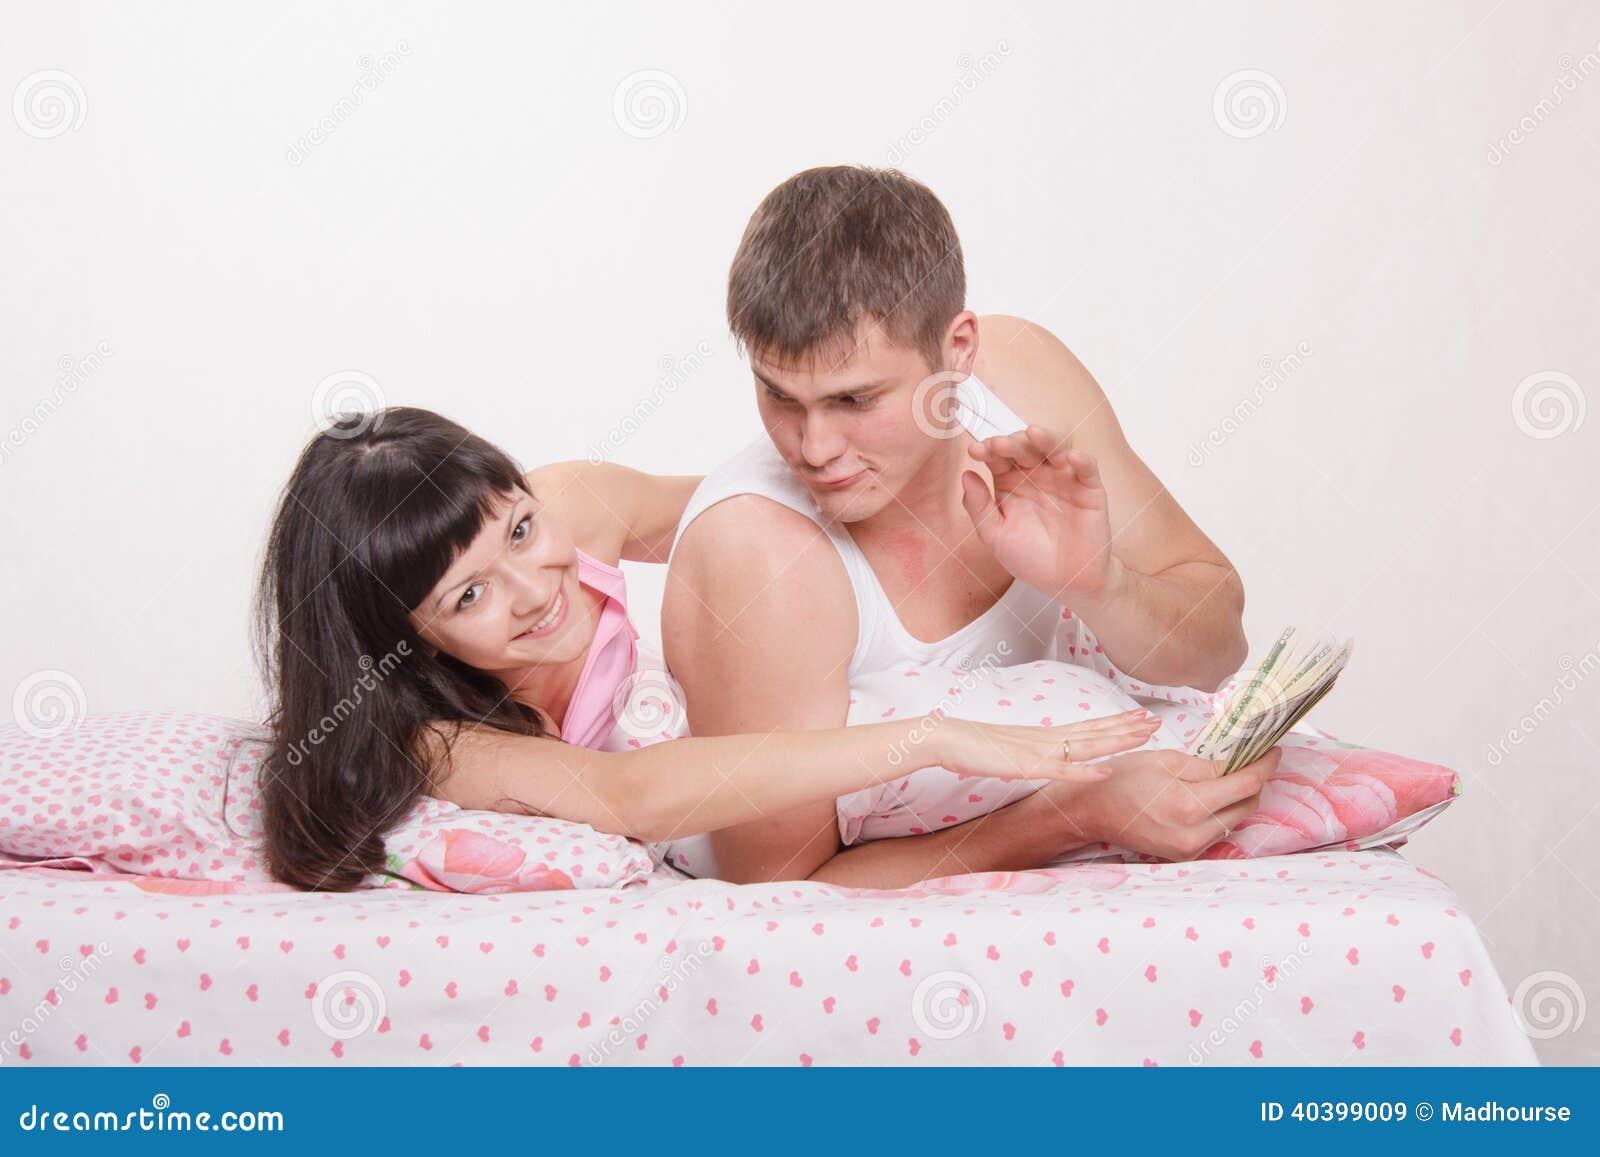 Husband and Wife Share Advance Stock Image - Image of greedy, dollar:  40399009